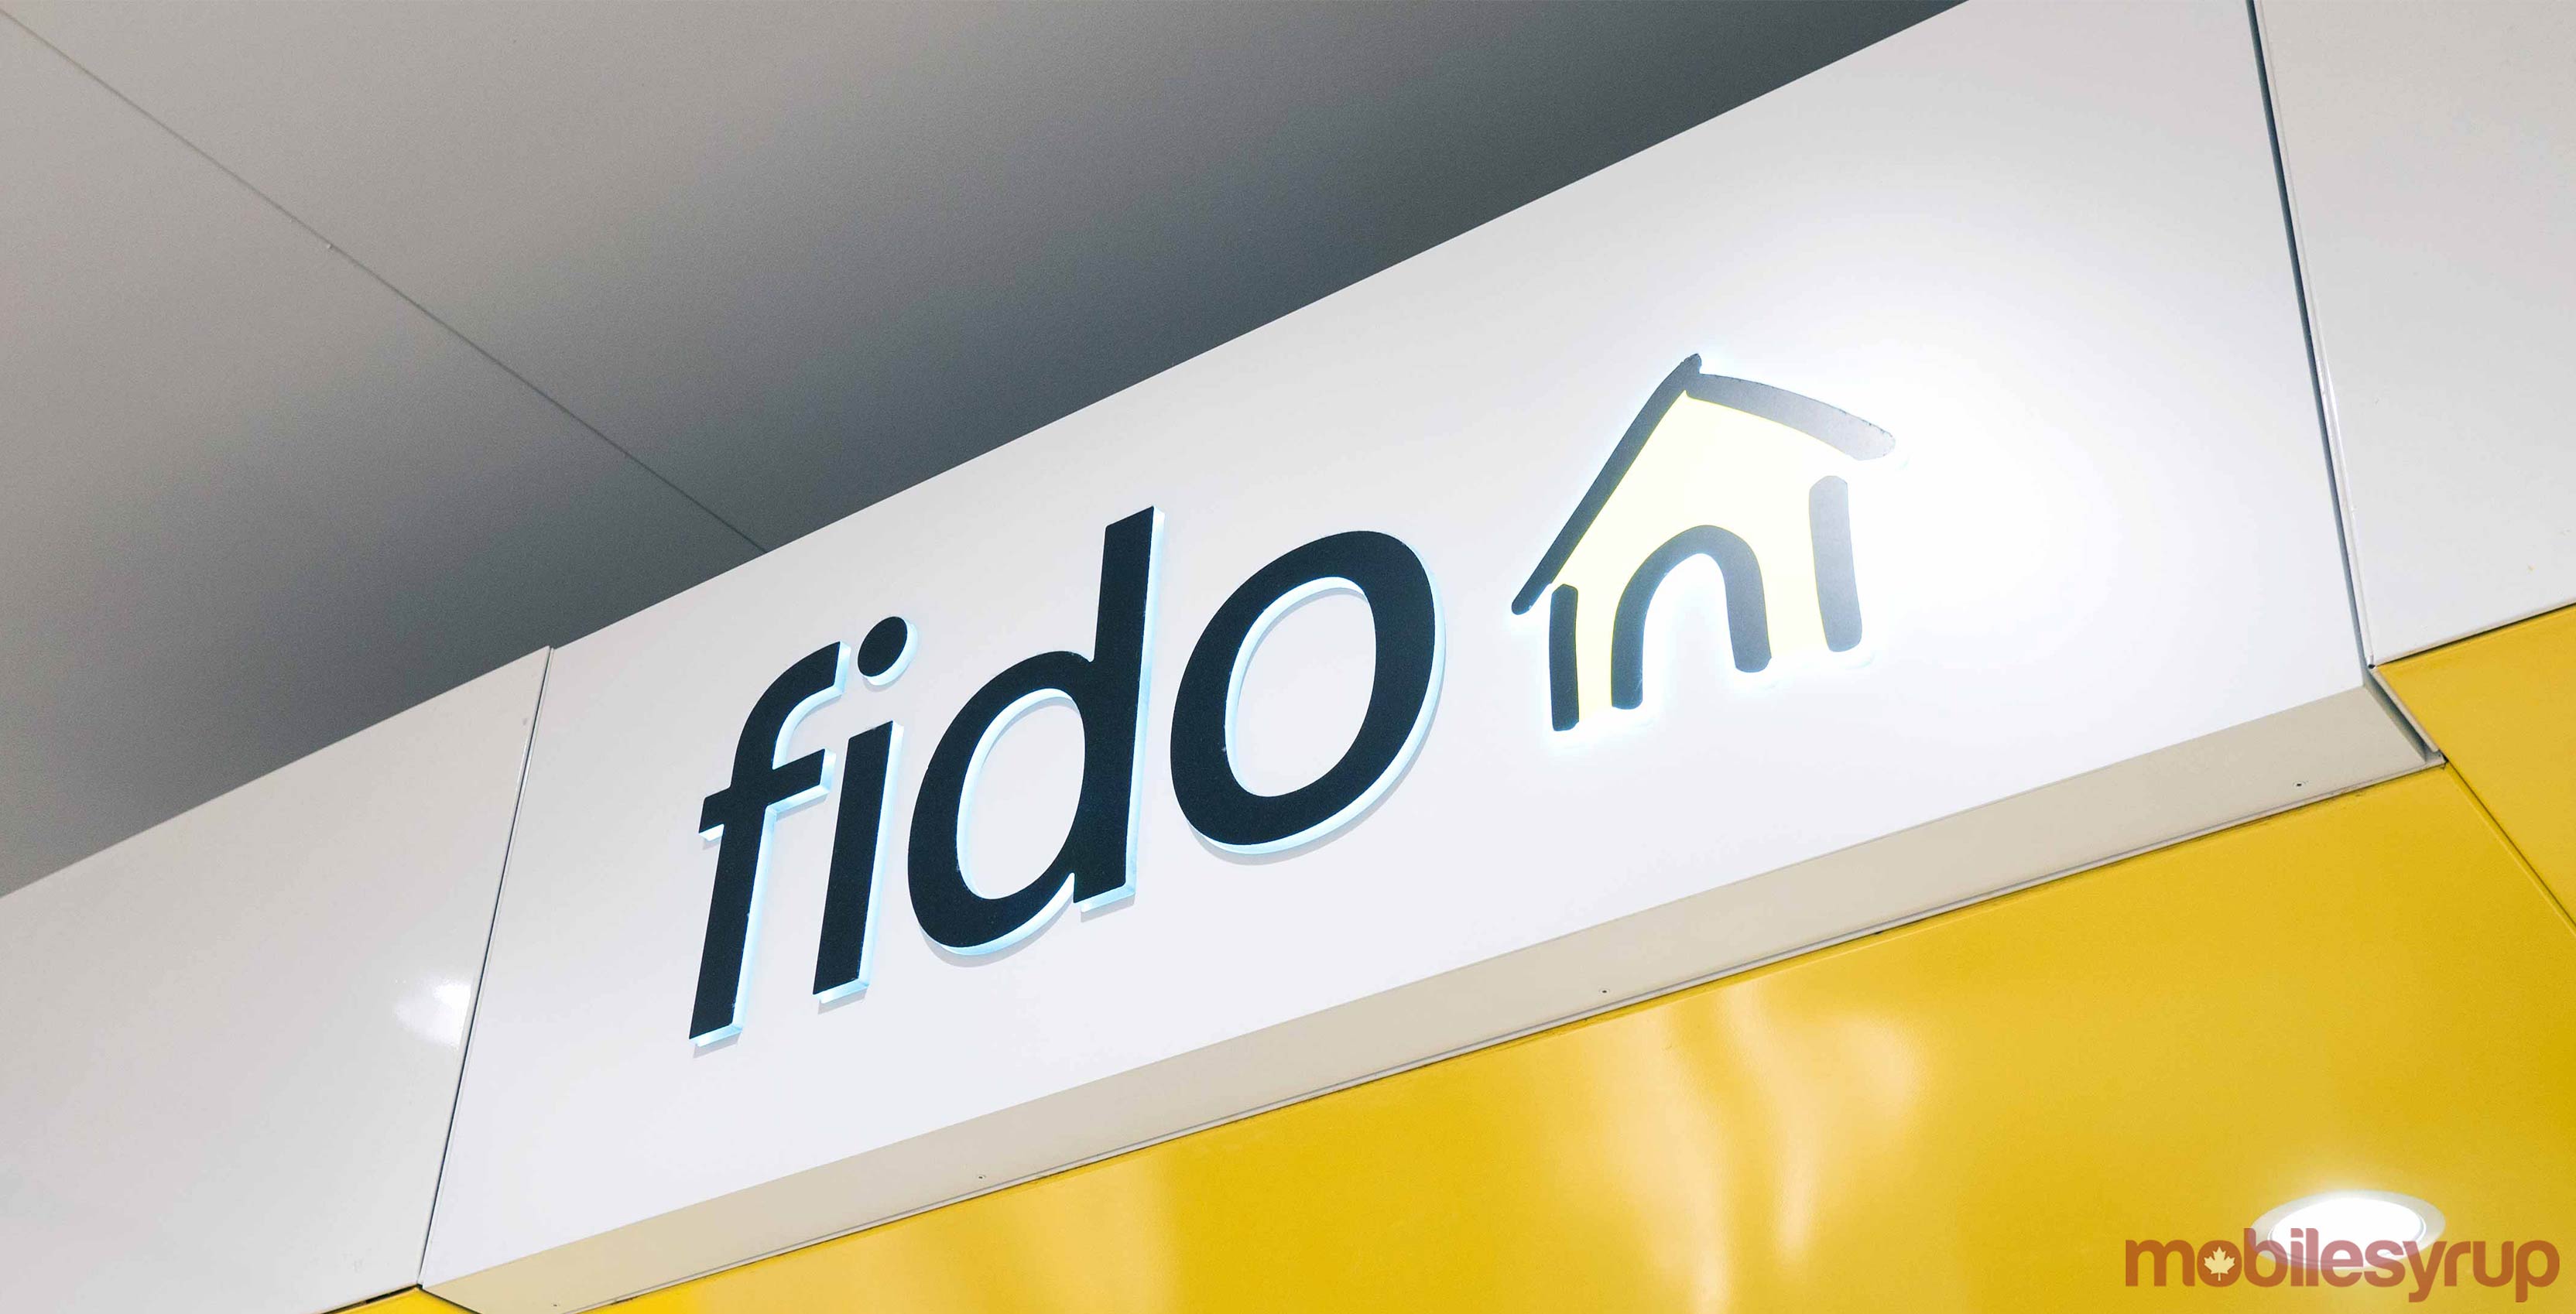 The Fido store front